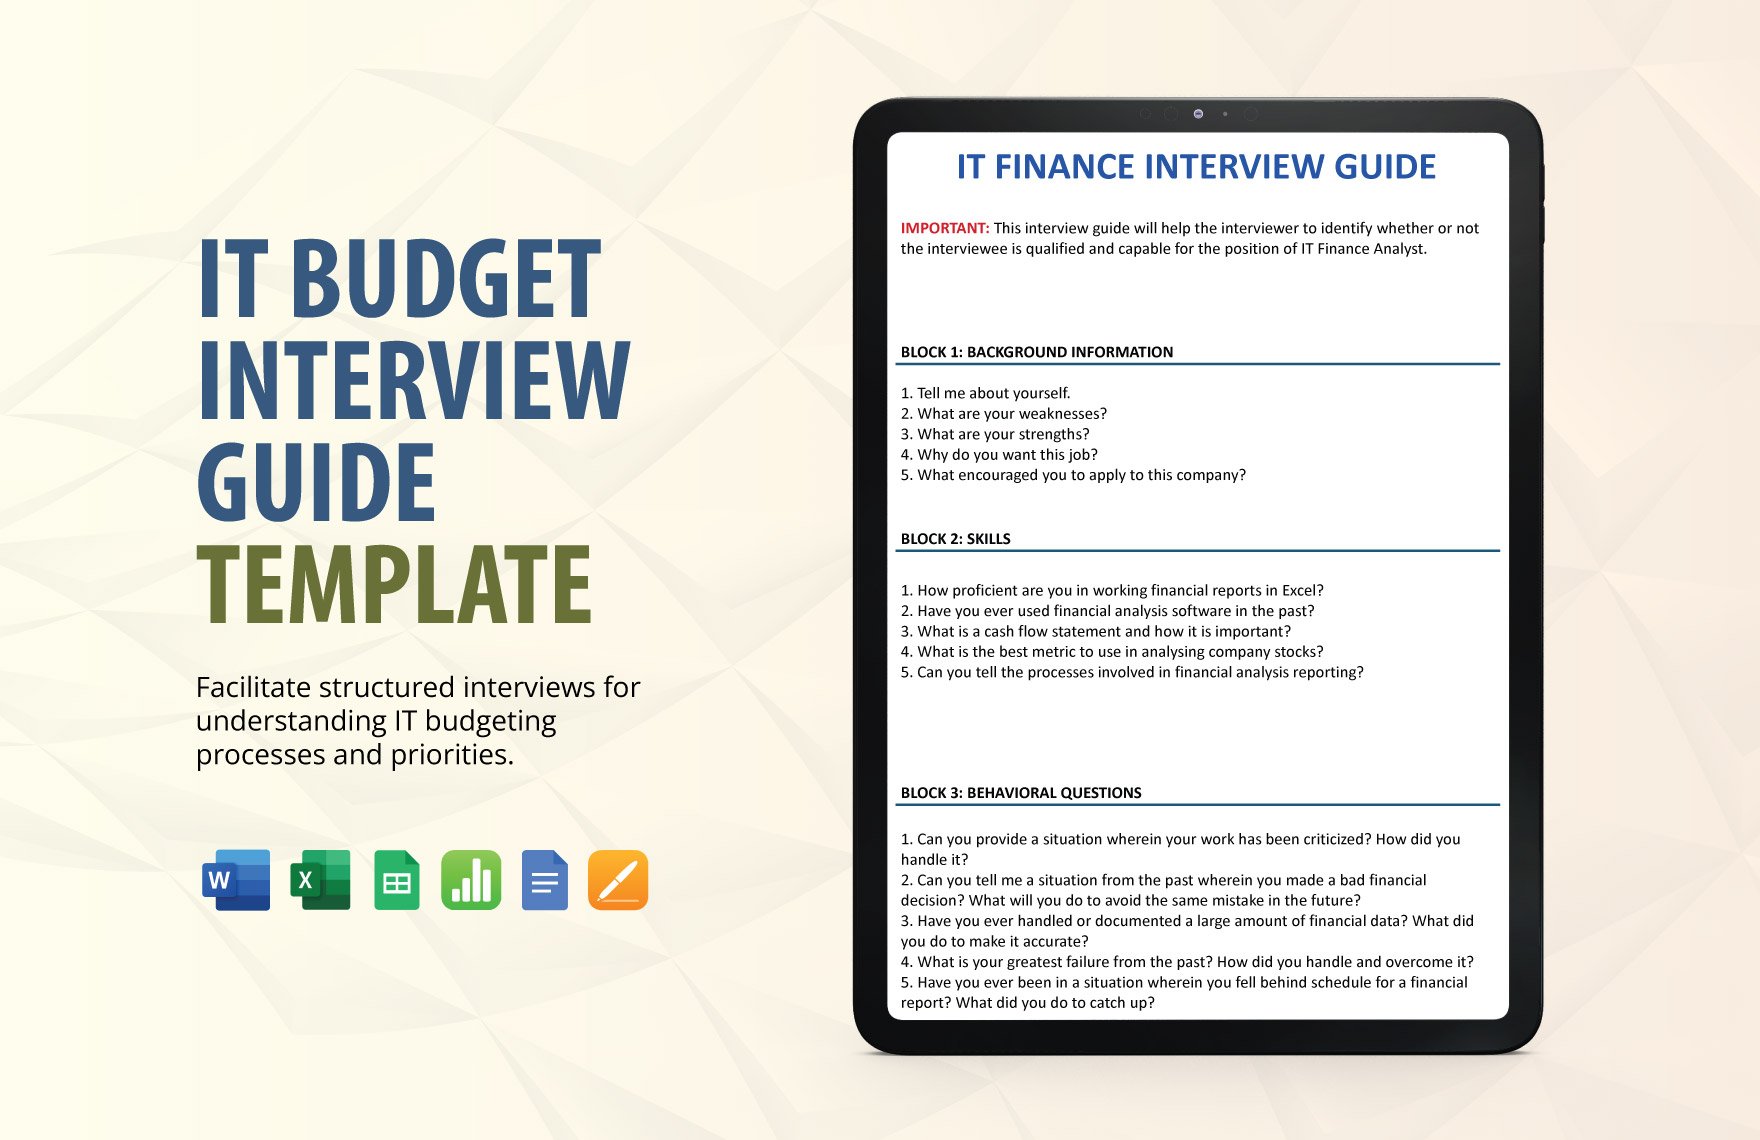 IT Budget Interview Guide Template